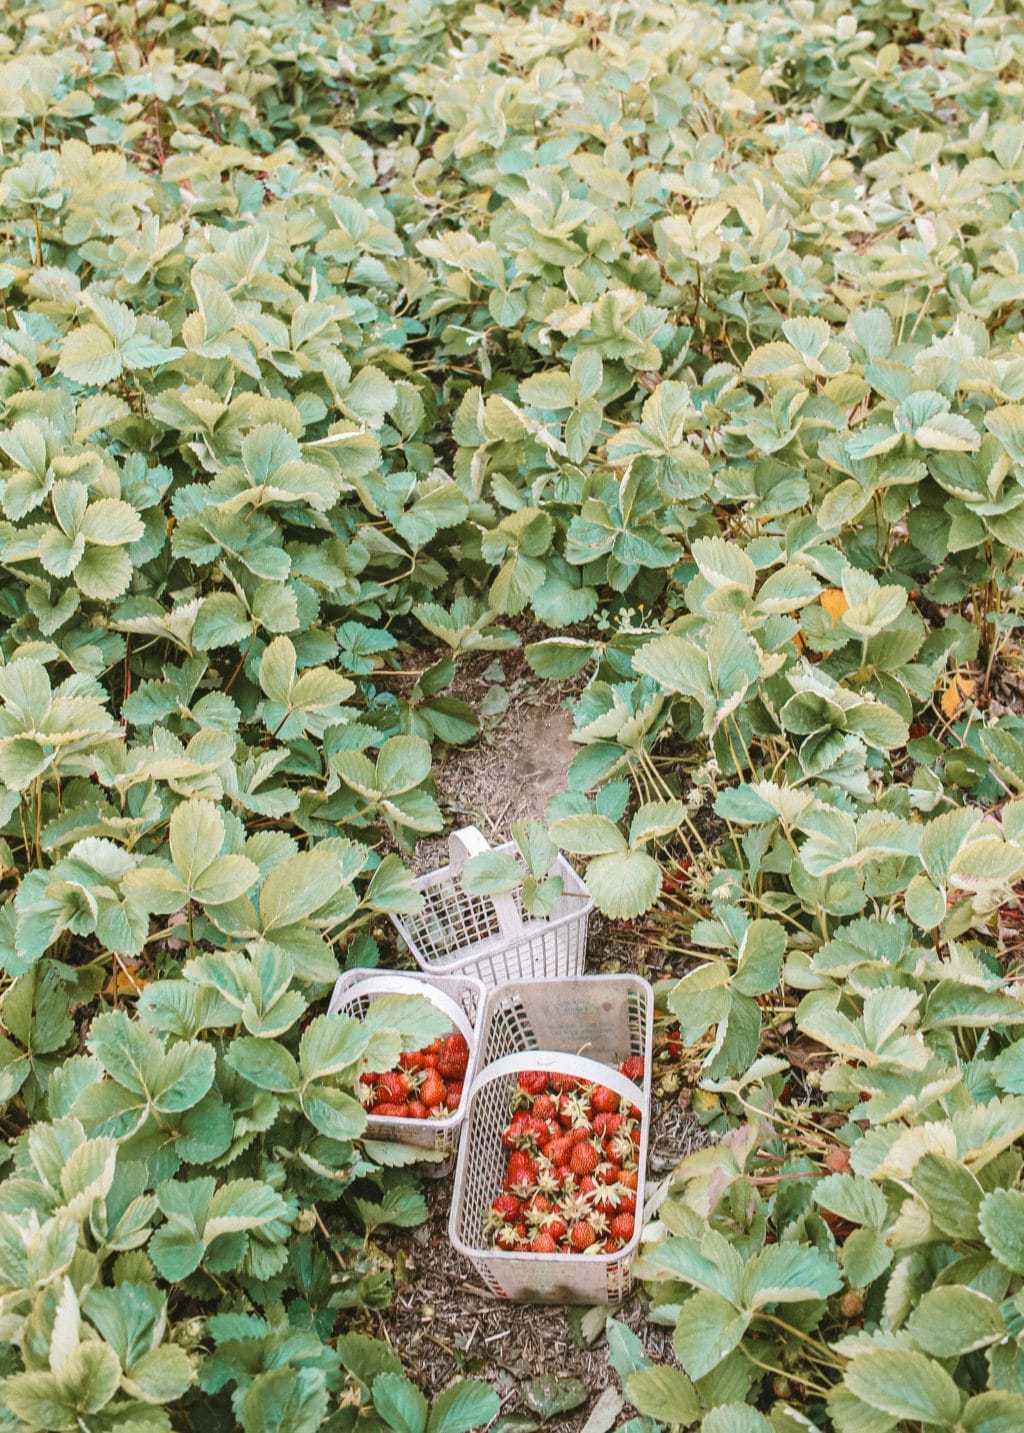 Pick your own strawberries